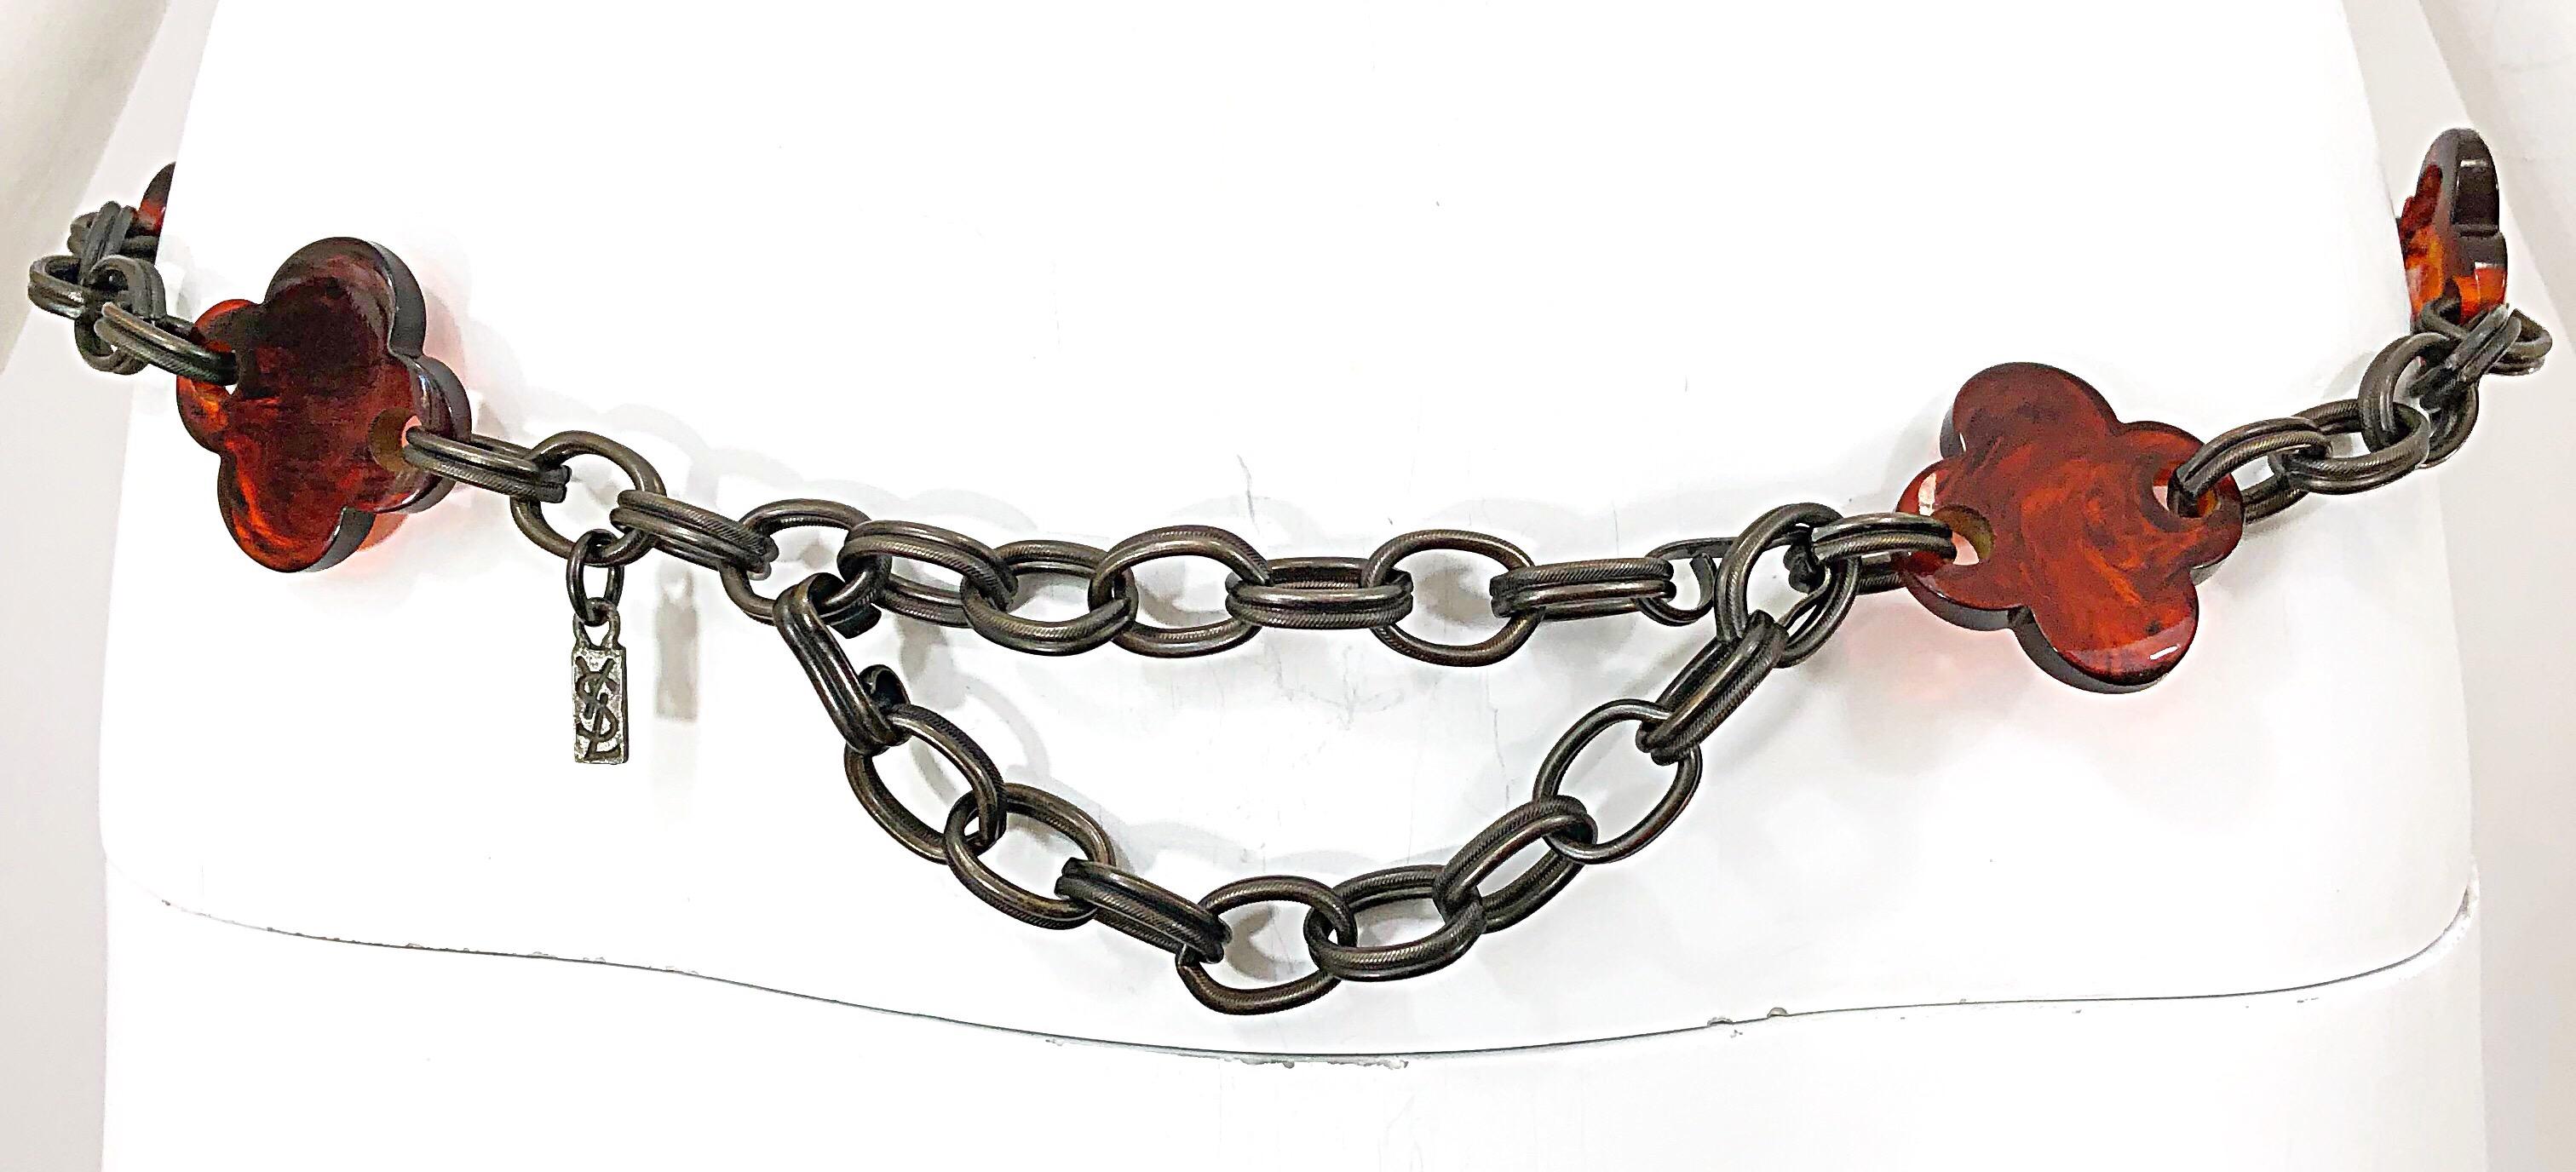 Rare vintage YVES SAINT LAURENT YSL four leaf clover tortoise and pewter chain link belt OR necklace! Features amber colored lucite clover shapes. YSL metal logo plate. Can really add some extra punch to any outfit. Great with jeans and a tank, or